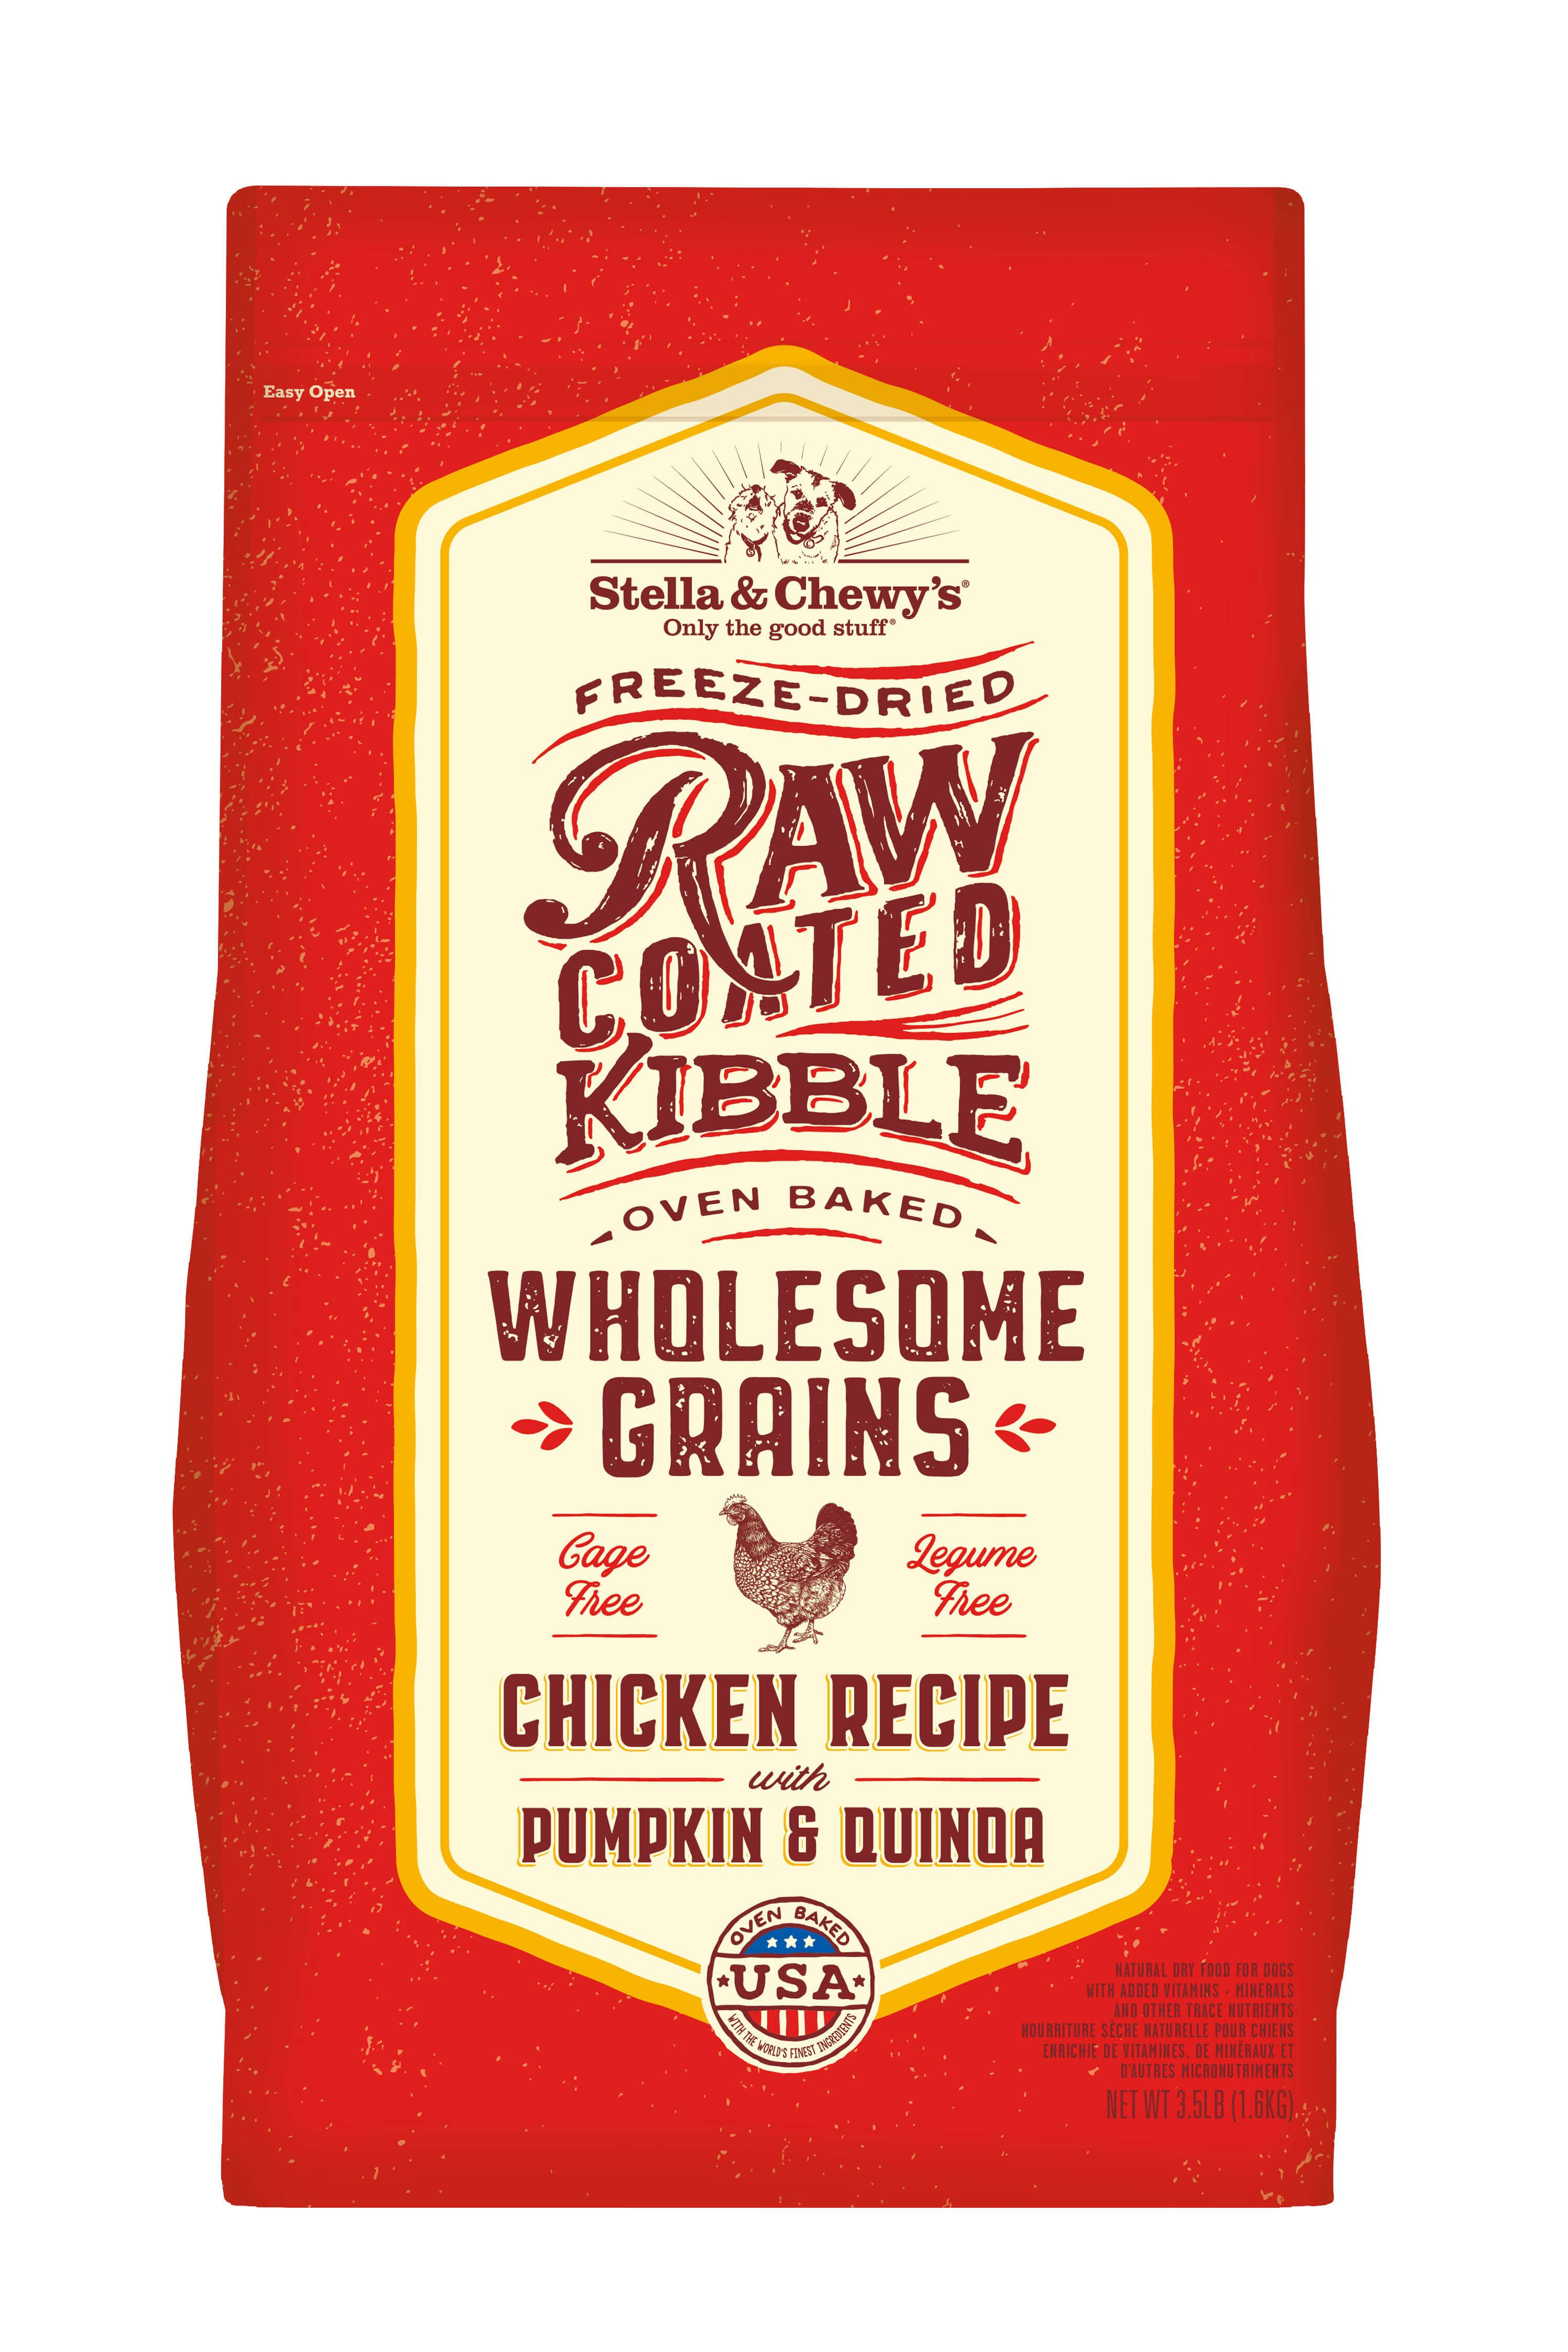 Stella & Chewy's Raw Coated Kibble with Wholesome Grains Chicken, Pumpkin & Quinoa Dry Dog Food, 3.5-Lb.